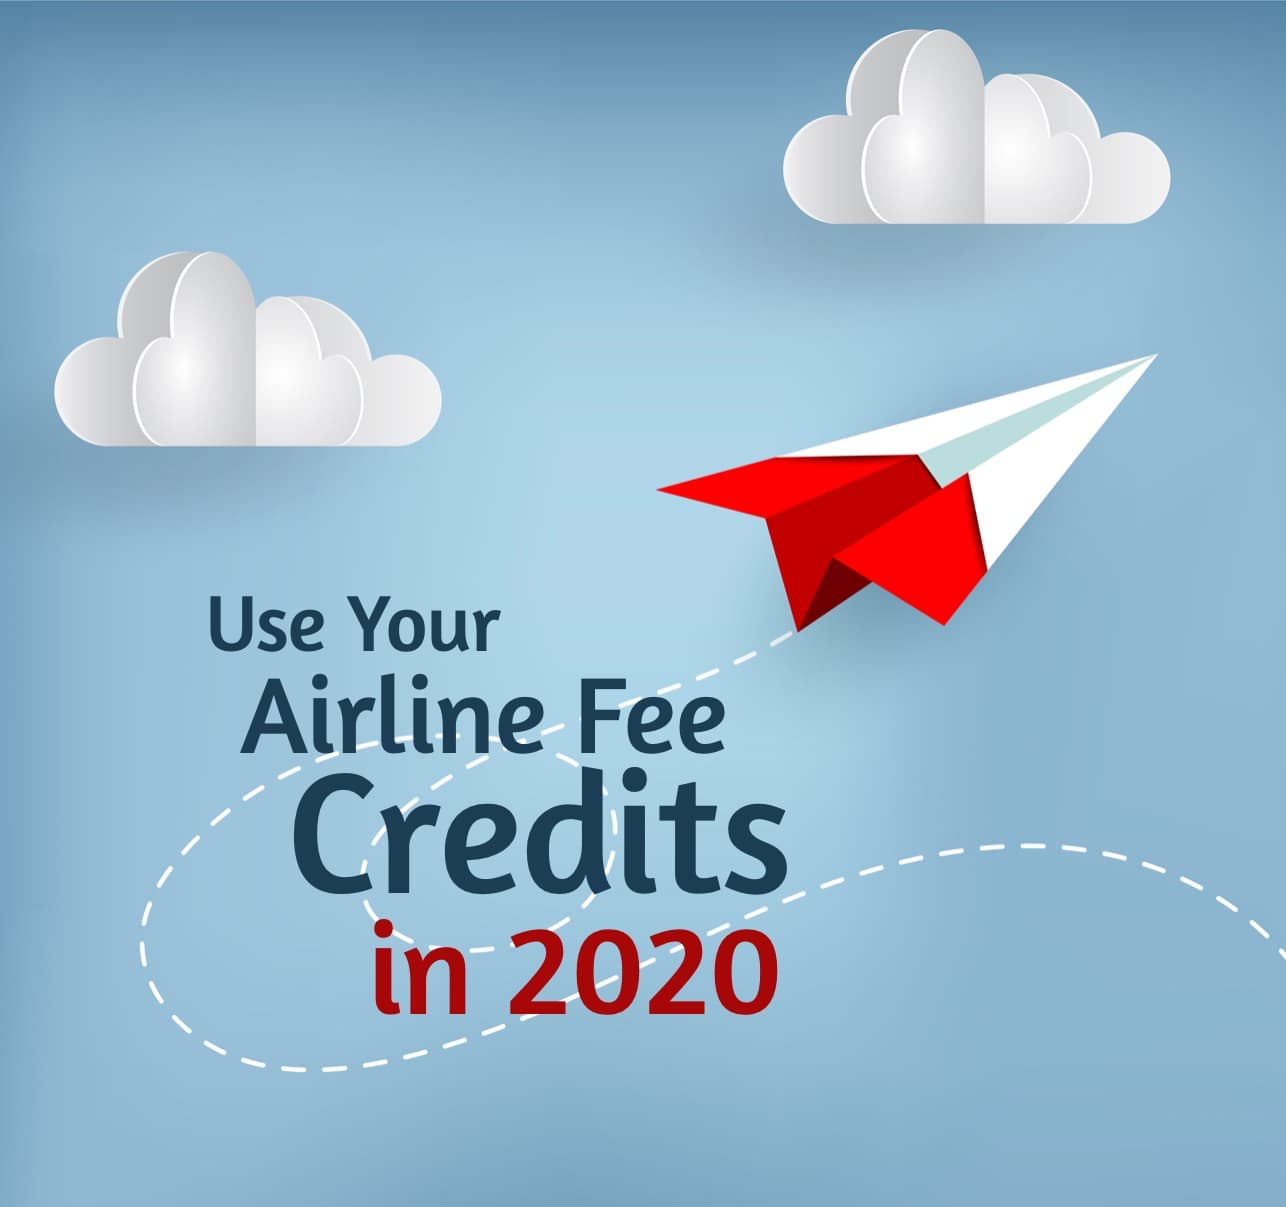 Use your Airline Fee Credits in 2020